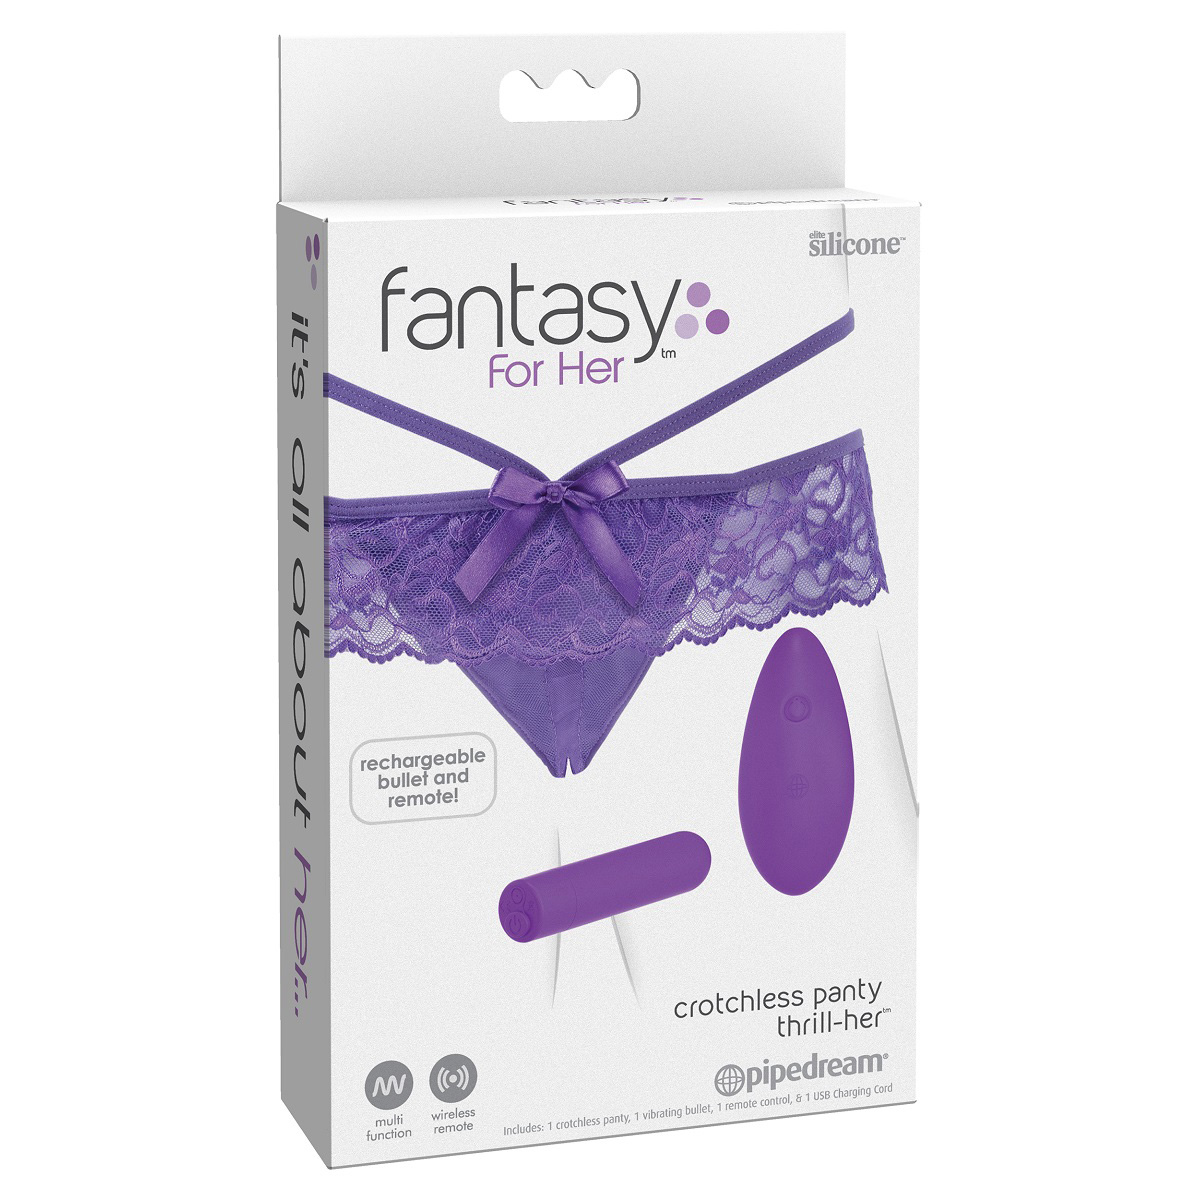  +  +   Fantasy For Her Crotchless Panty Thrill-Her